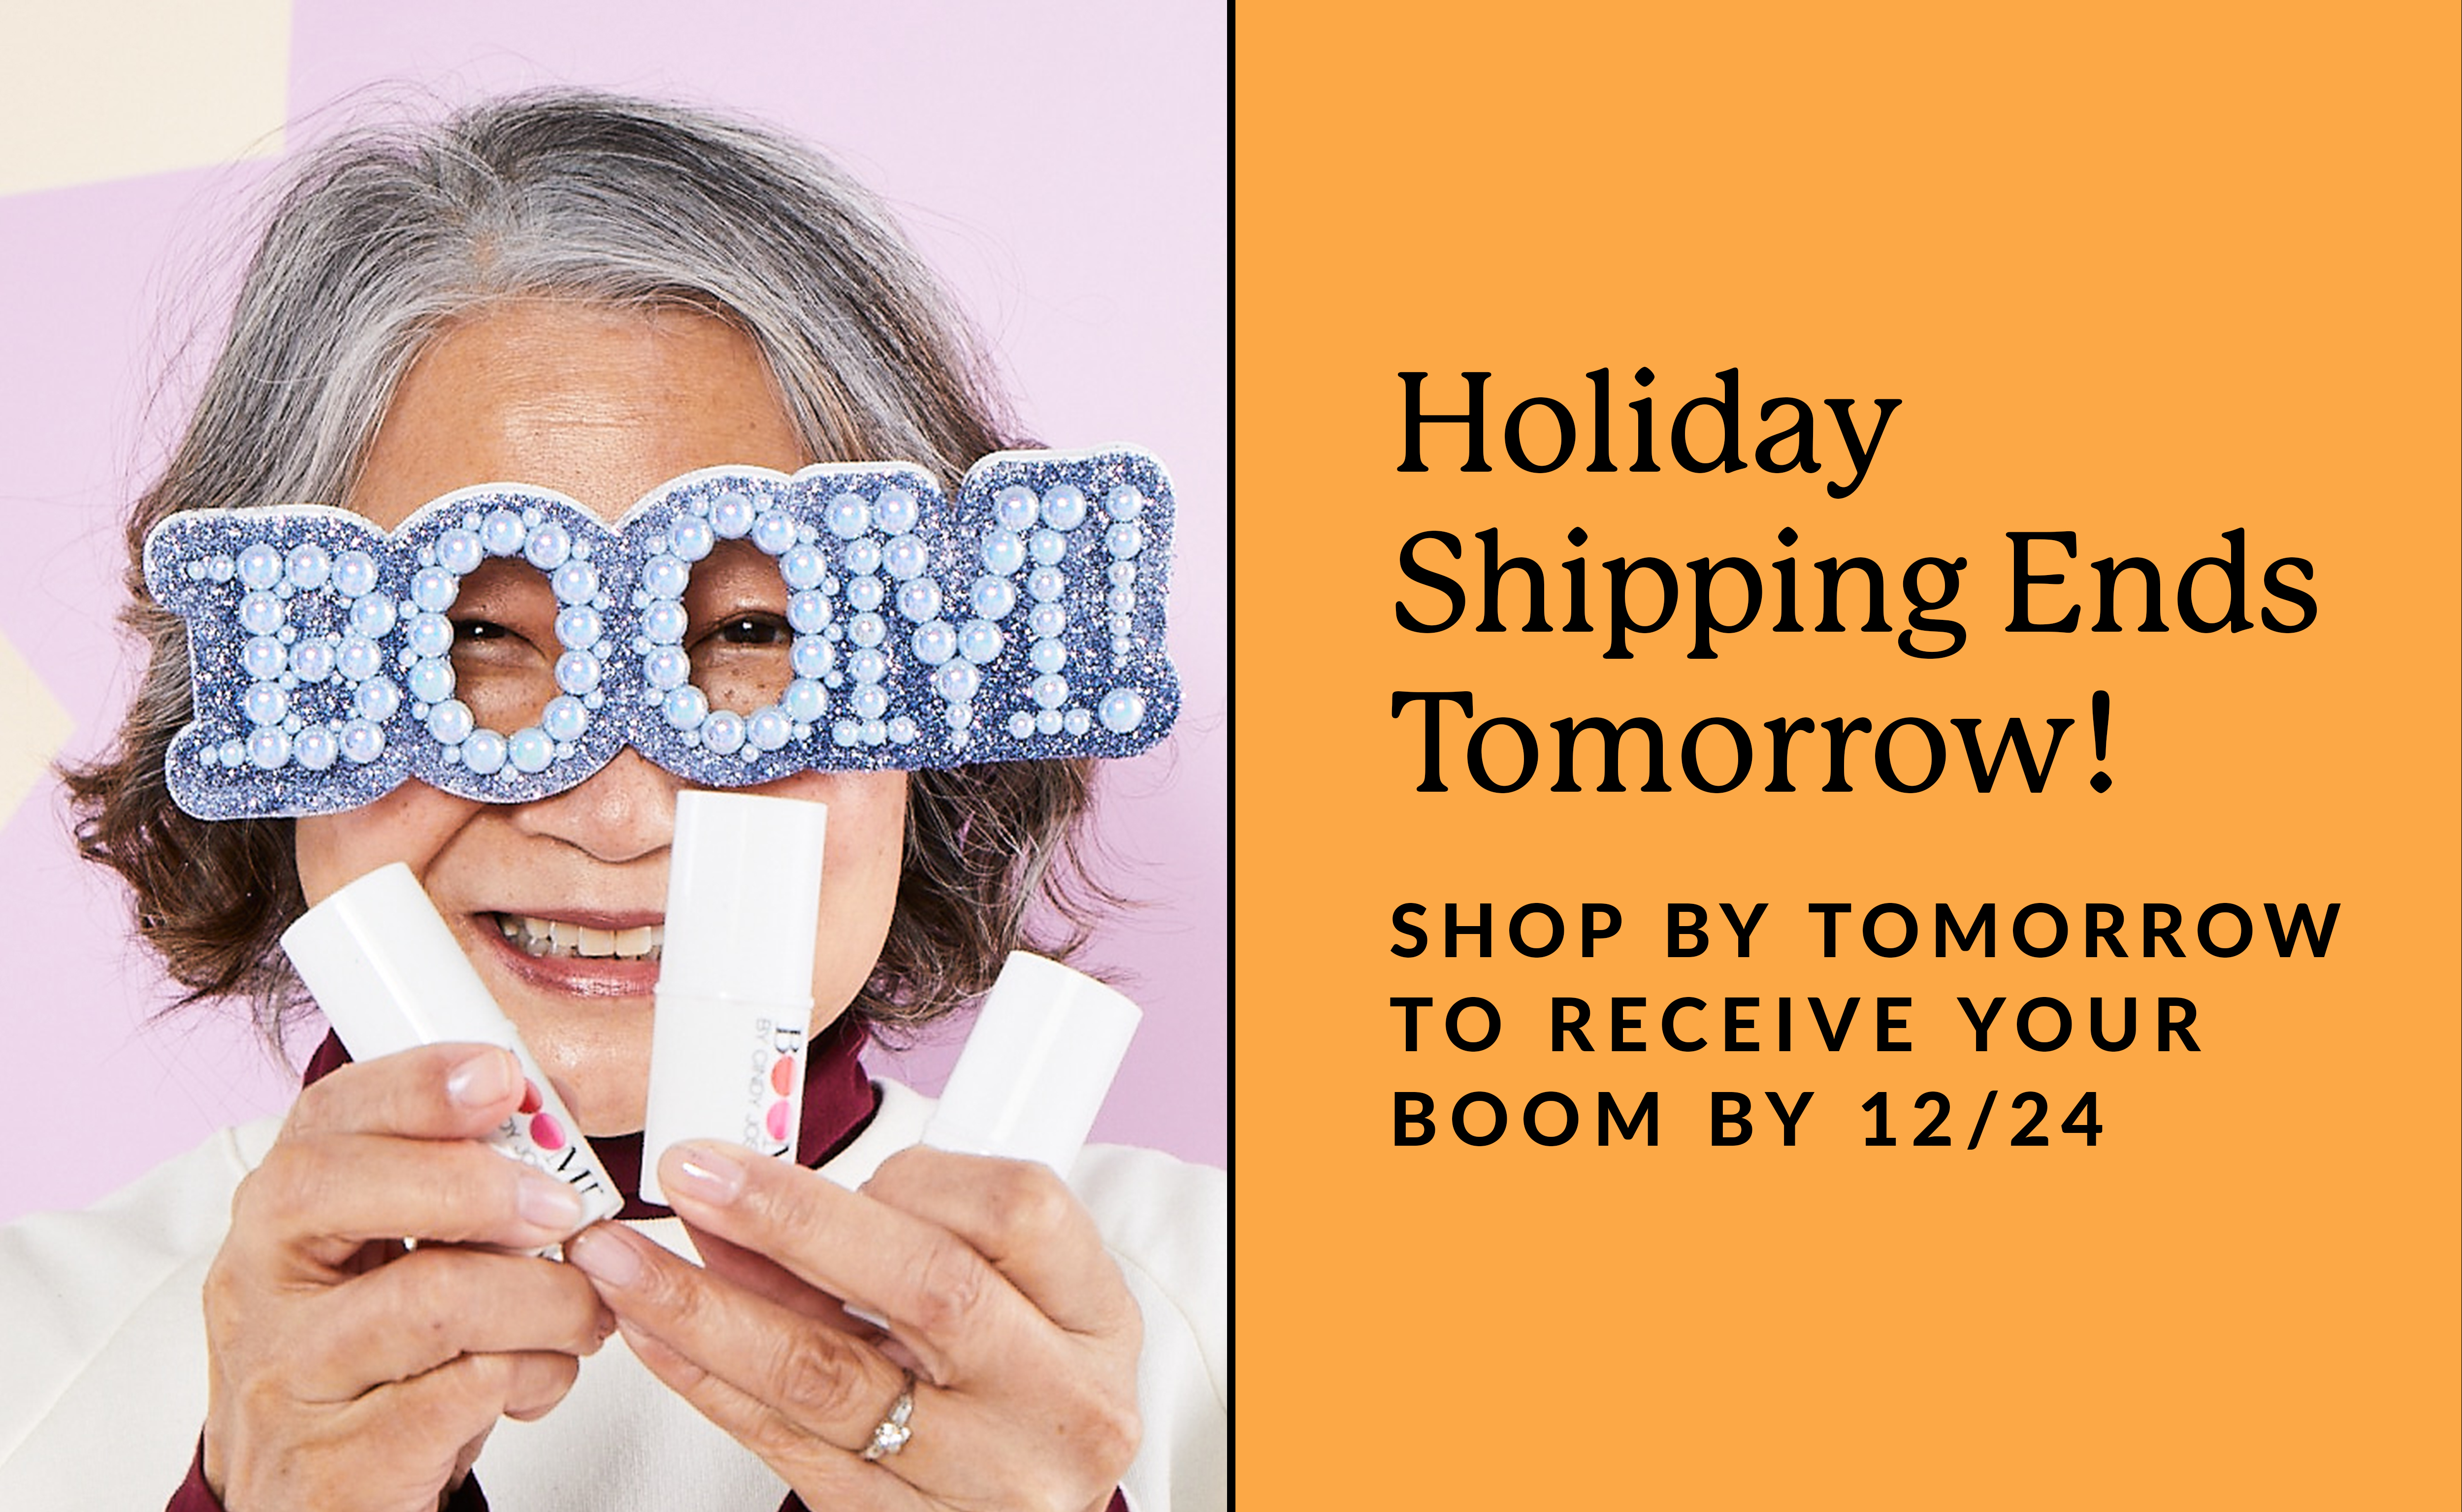 Holiday Shipping Ends Tomorrow